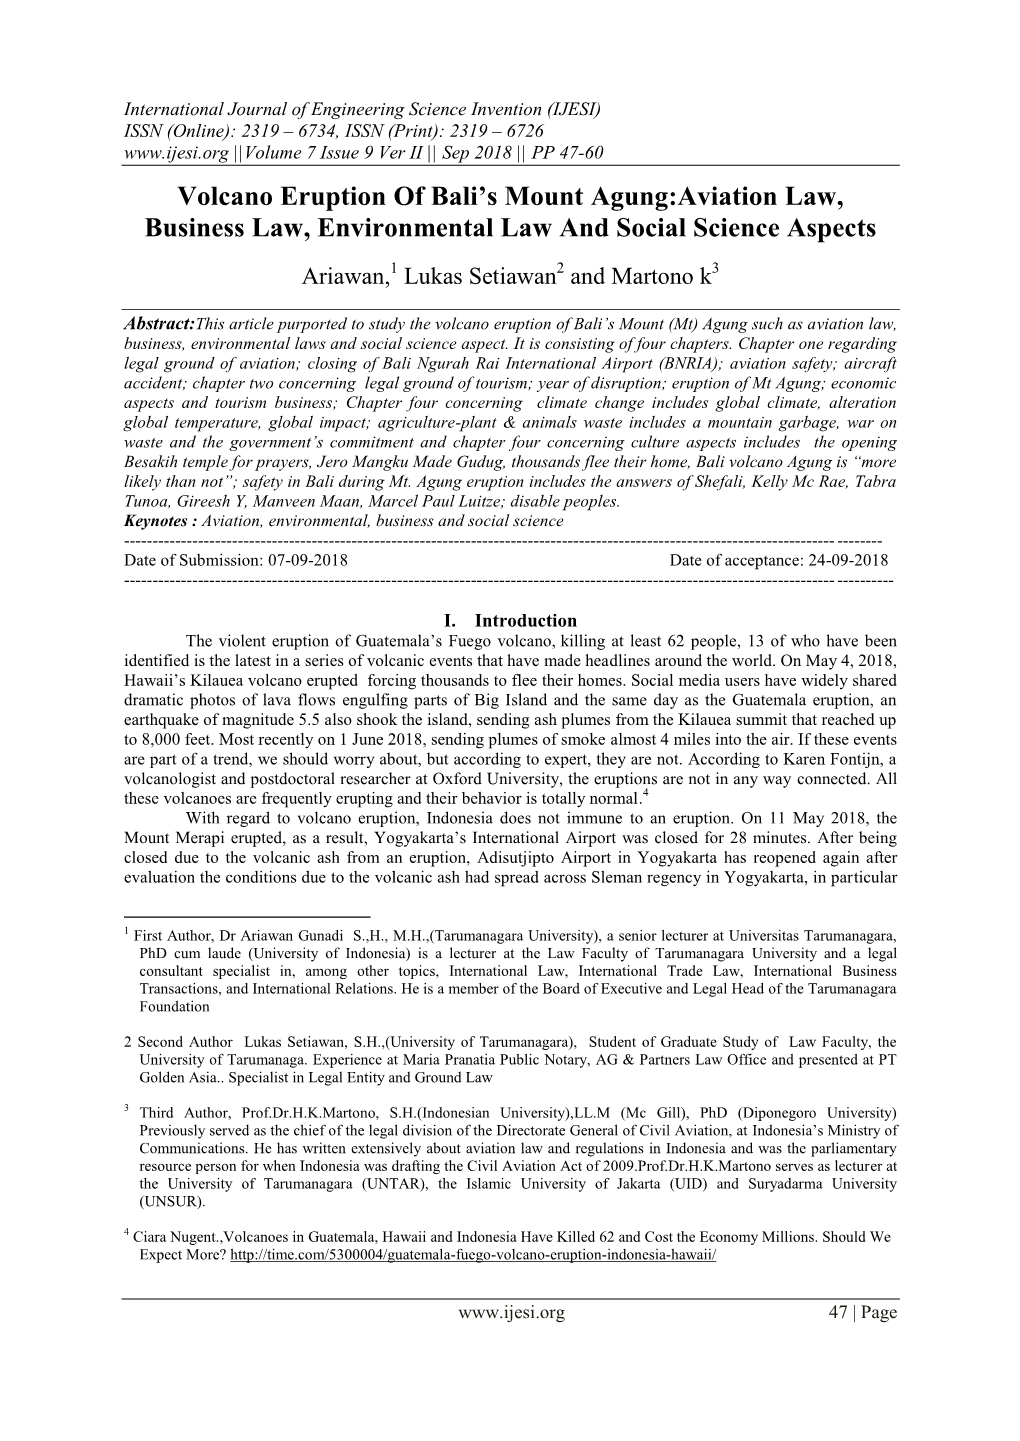 Volcano Eruption of Bali's Mount Agung:Aviation Law, Business Law